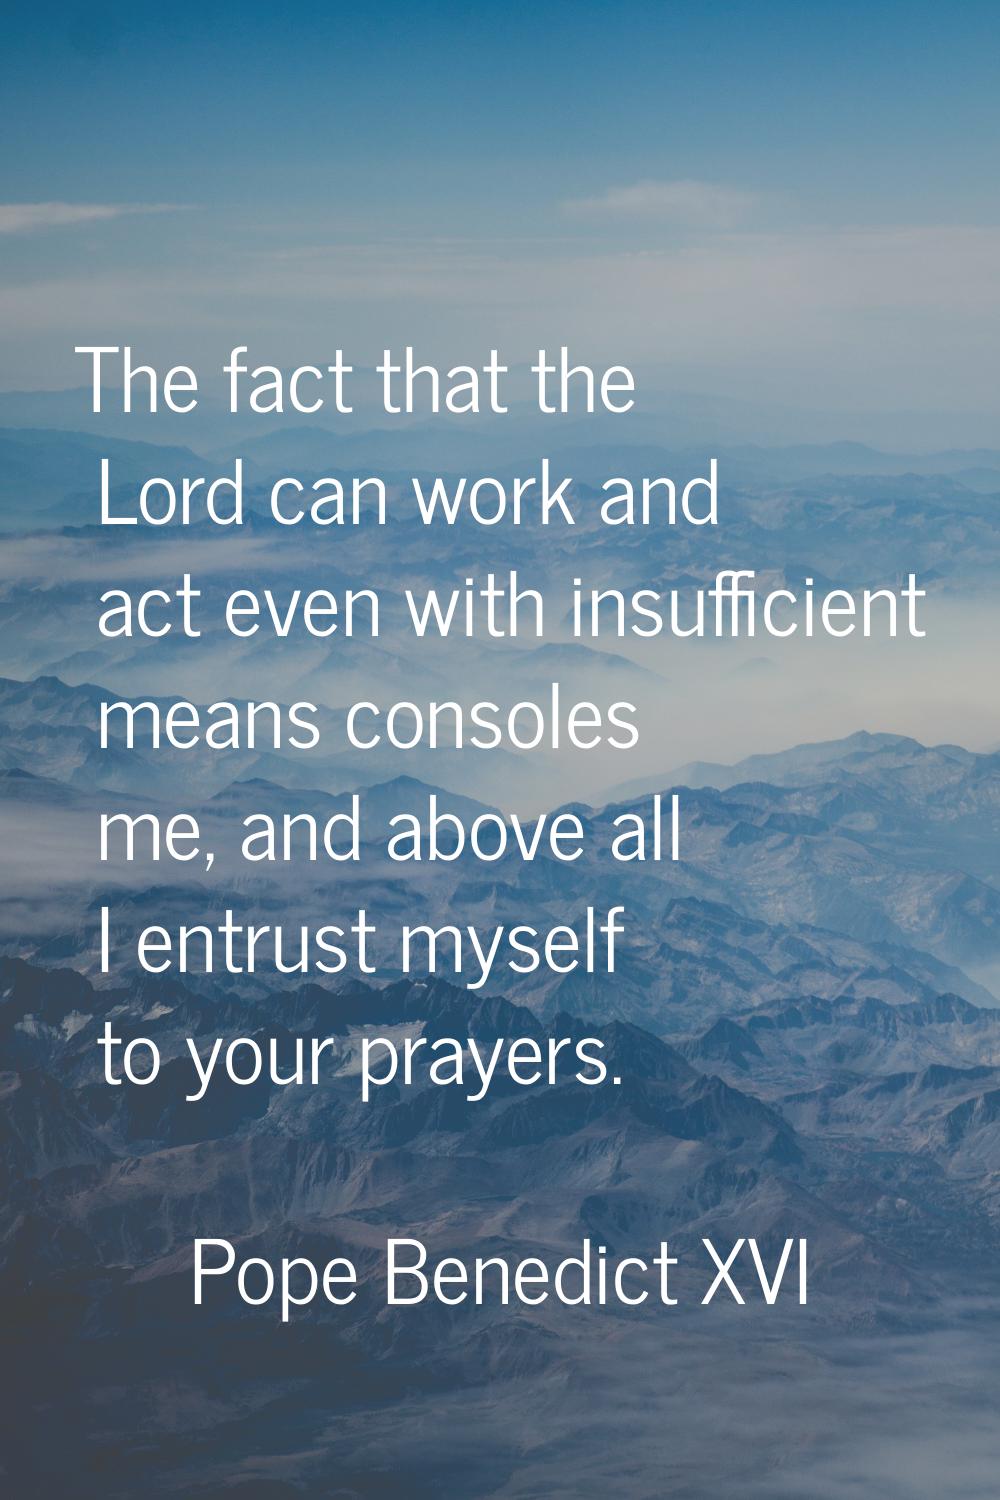 The fact that the Lord can work and act even with insufficient means consoles me, and above all I e